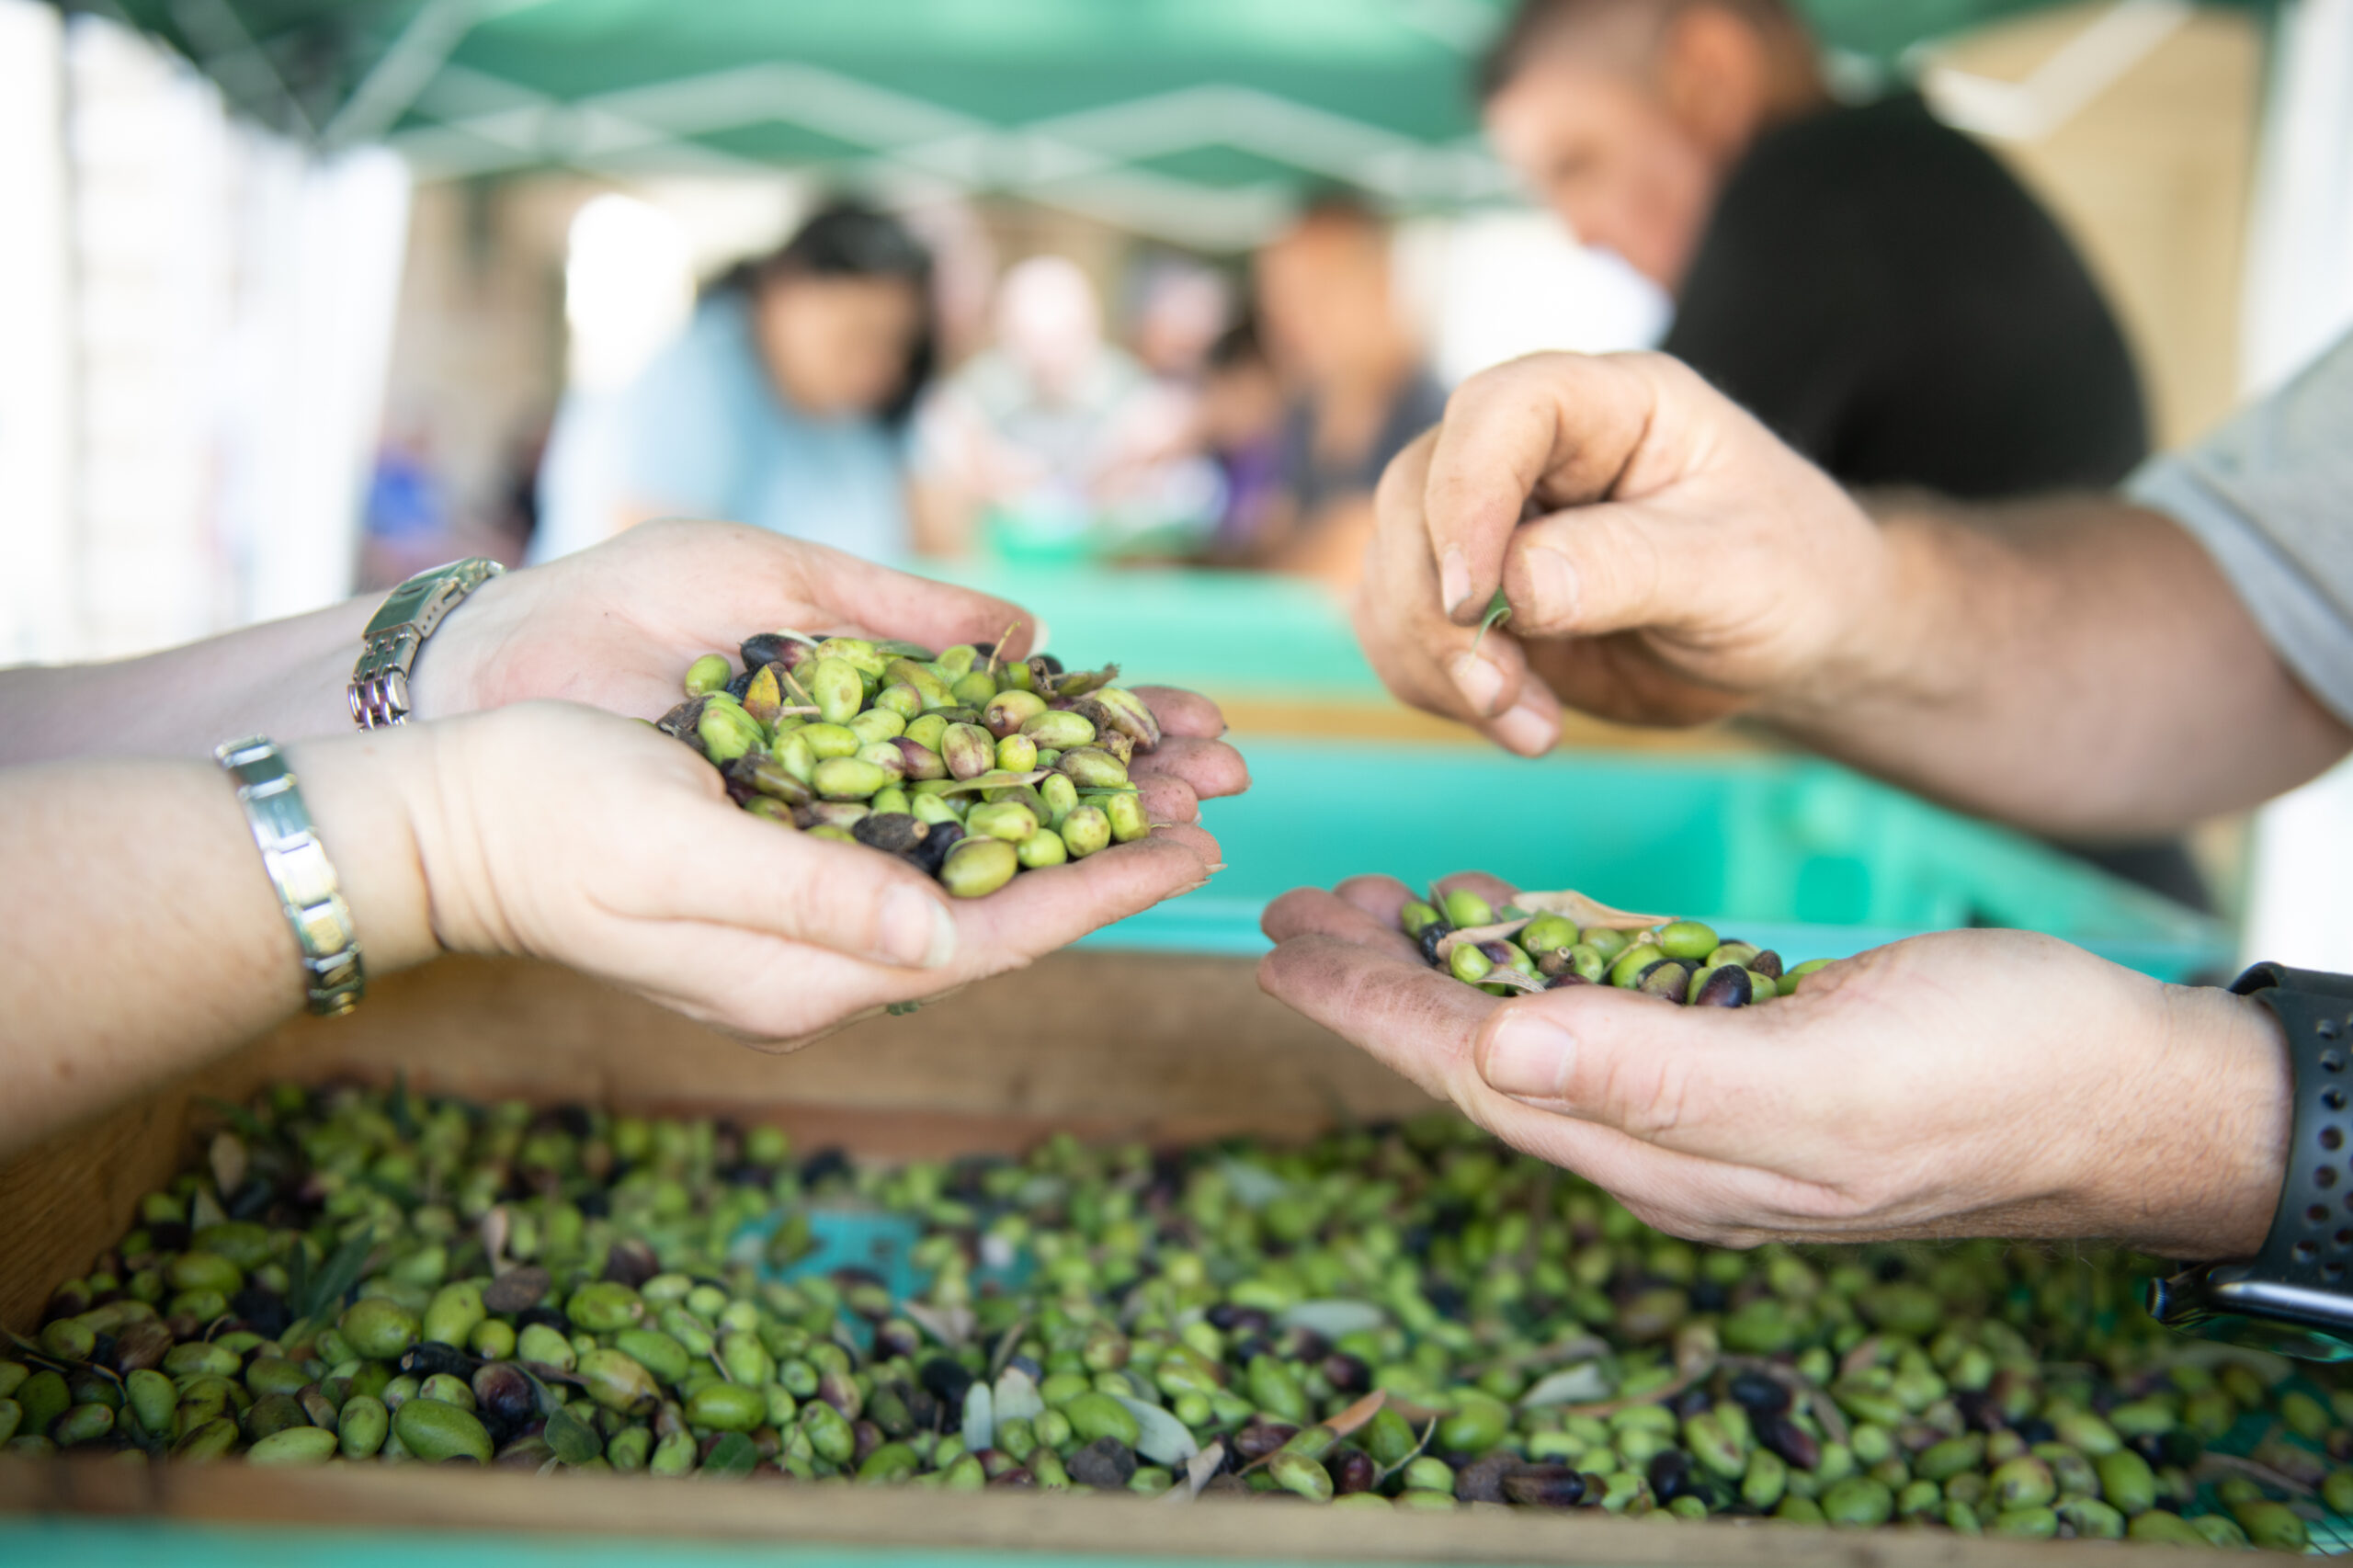 BOV Staff Joins Olive Picking Event in Support of Caritas